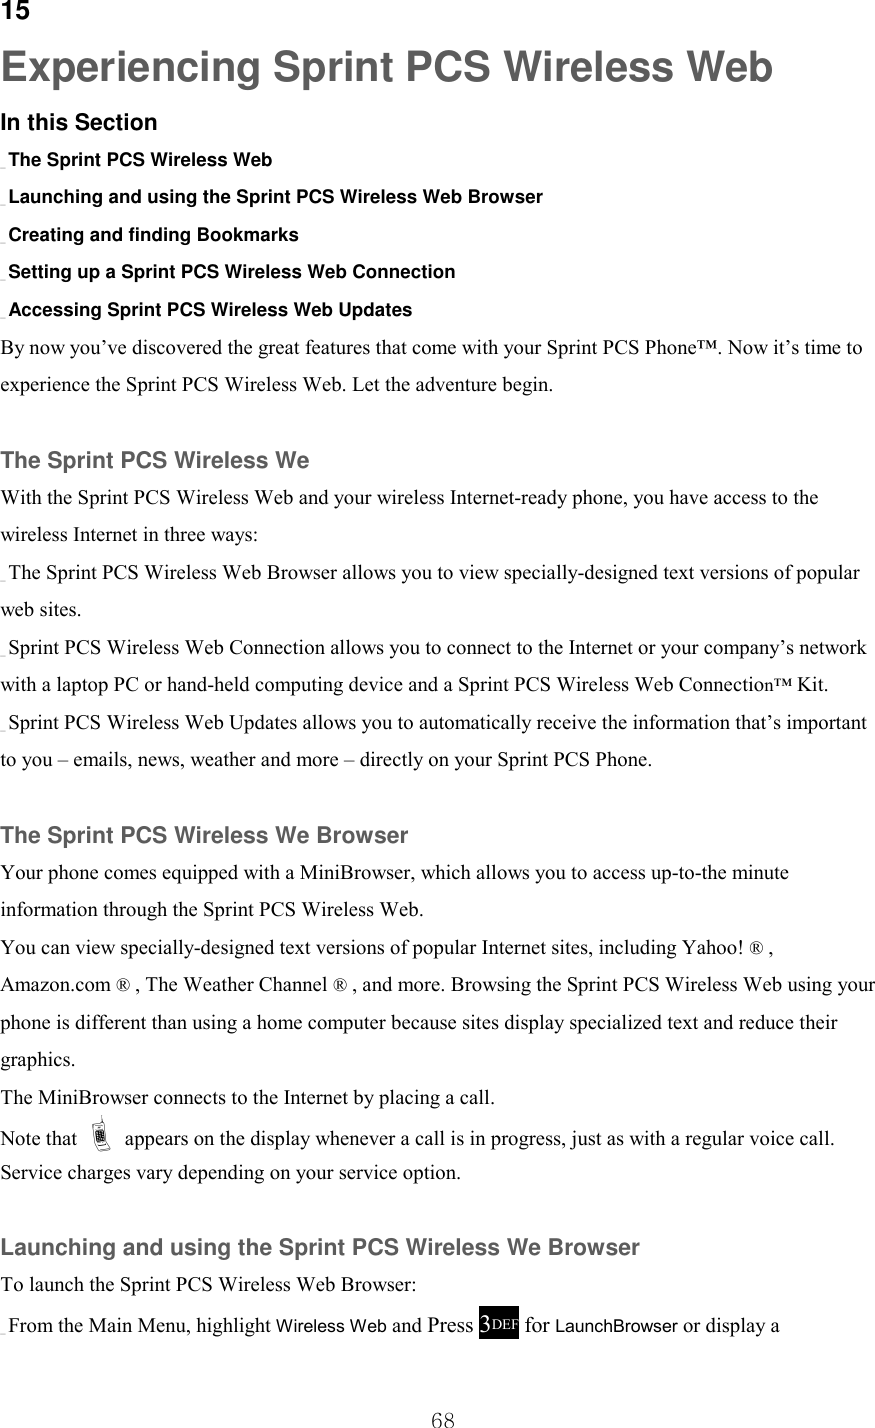  68 15 Experiencing Sprint PCS Wireless Web In this Section _ The Sprint PCS Wireless Web _ Launching and using the Sprint PCS Wireless Web Browser _ Creating and finding Bookmarks _ Setting up a Sprint PCS Wireless Web Connection _ Accessing Sprint PCS Wireless Web Updates By now you’ve discovered the great features that come with your Sprint PCS Phone™. Now it’s time to experience the Sprint PCS Wireless Web. Let the adventure begin.  The Sprint PCS Wireless We With the Sprint PCS Wireless Web and your wireless Internet-ready phone, you have access to the wireless Internet in three ways: _ The Sprint PCS Wireless Web Browser allows you to view specially-designed text versions of popular web sites. _ Sprint PCS Wireless Web Connection allows you to connect to the Internet or your company’s network with a laptop PC or hand-held computing device and a Sprint PCS Wireless Web Connection™ Kit. _ Sprint PCS Wireless Web Updates allows you to automatically receive the information that’s important to you – emails, news, weather and more – directly on your Sprint PCS Phone.  The Sprint PCS Wireless We Browser Your phone comes equipped with a MiniBrowser, which allows you to access up-to-the minute information through the Sprint PCS Wireless Web. You can view specially-designed text versions of popular Internet sites, including Yahoo! ® , Amazon.com ® , The Weather Channel ® , and more. Browsing the Sprint PCS Wireless Web using your phone is different than using a home computer because sites display specialized text and reduce their graphics. The MiniBrowser connects to the Internet by placing a call. Note that ! appears on the display whenever a call is in progress, just as with a regular voice call. Service charges vary depending on your service option.  Launching and using the Sprint PCS Wireless We Browser To launch the Sprint PCS Wireless Web Browser: _ From the Main Menu, highlight Wireless Web and Press 3DEF for LaunchBrowser or display a 